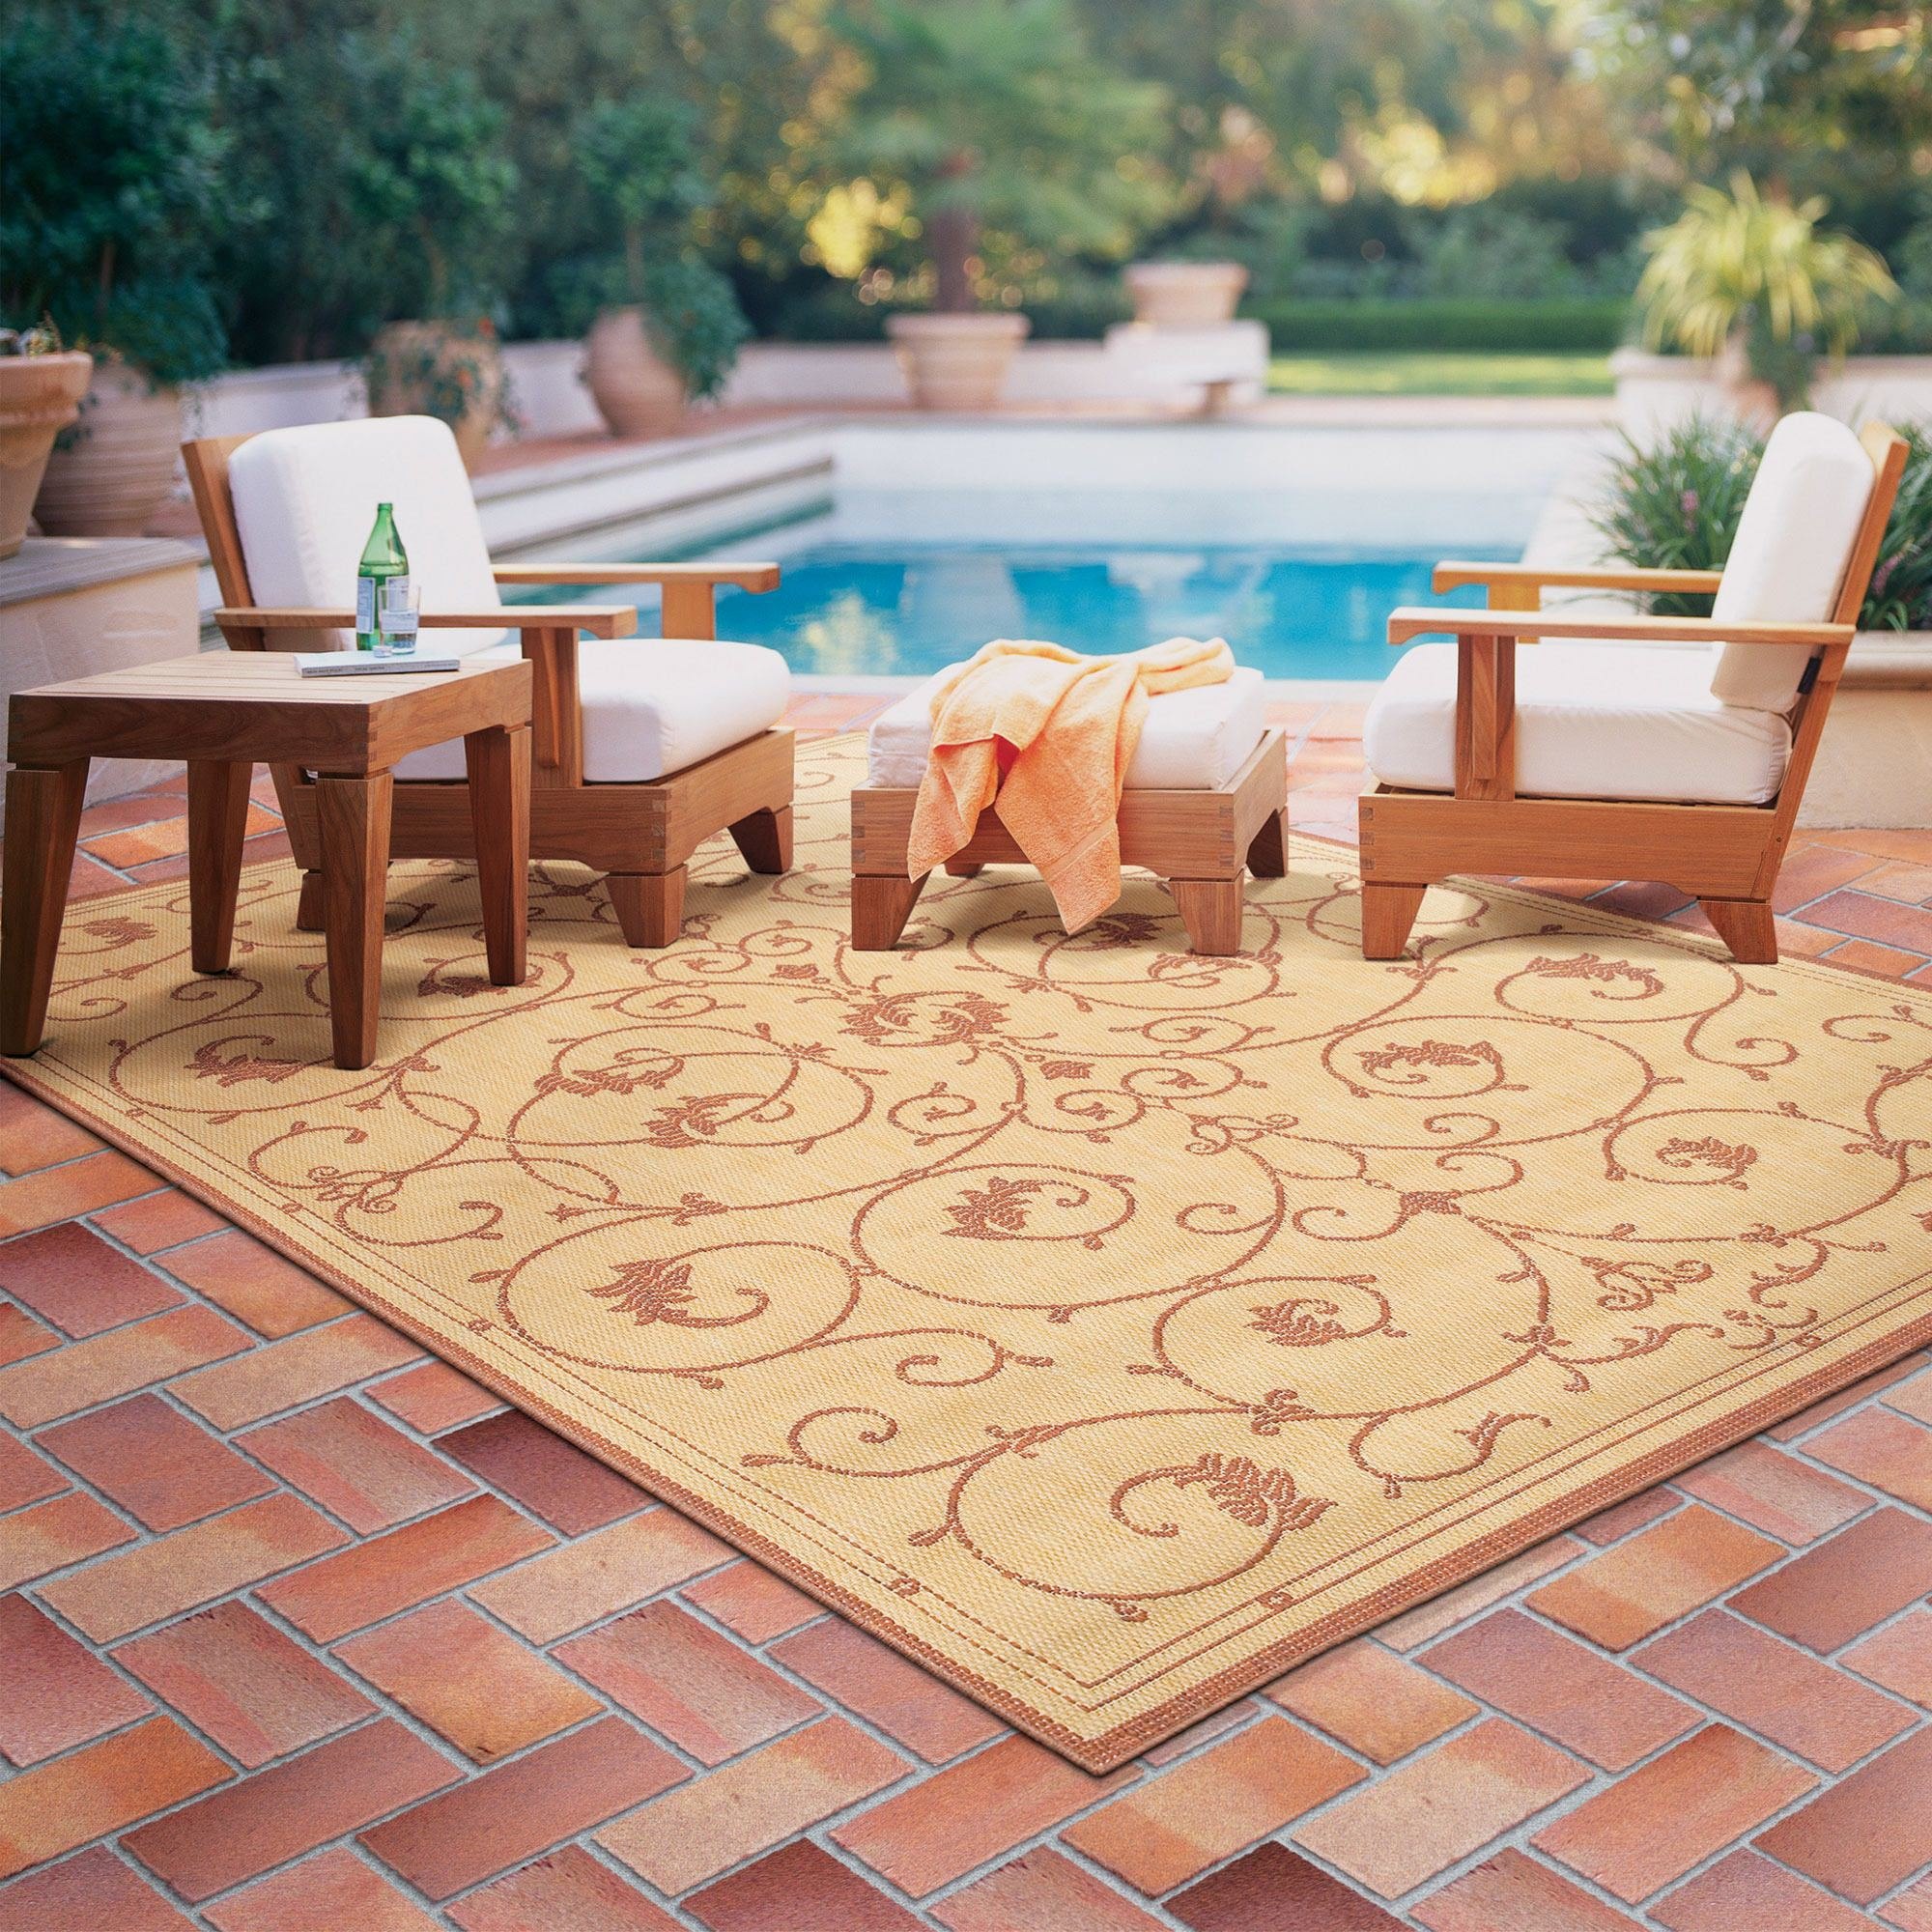 Bodacious Outdoor Carpet Laudable Large Outdoor Carpet Fascinate intended for sizing 2000 X 2000